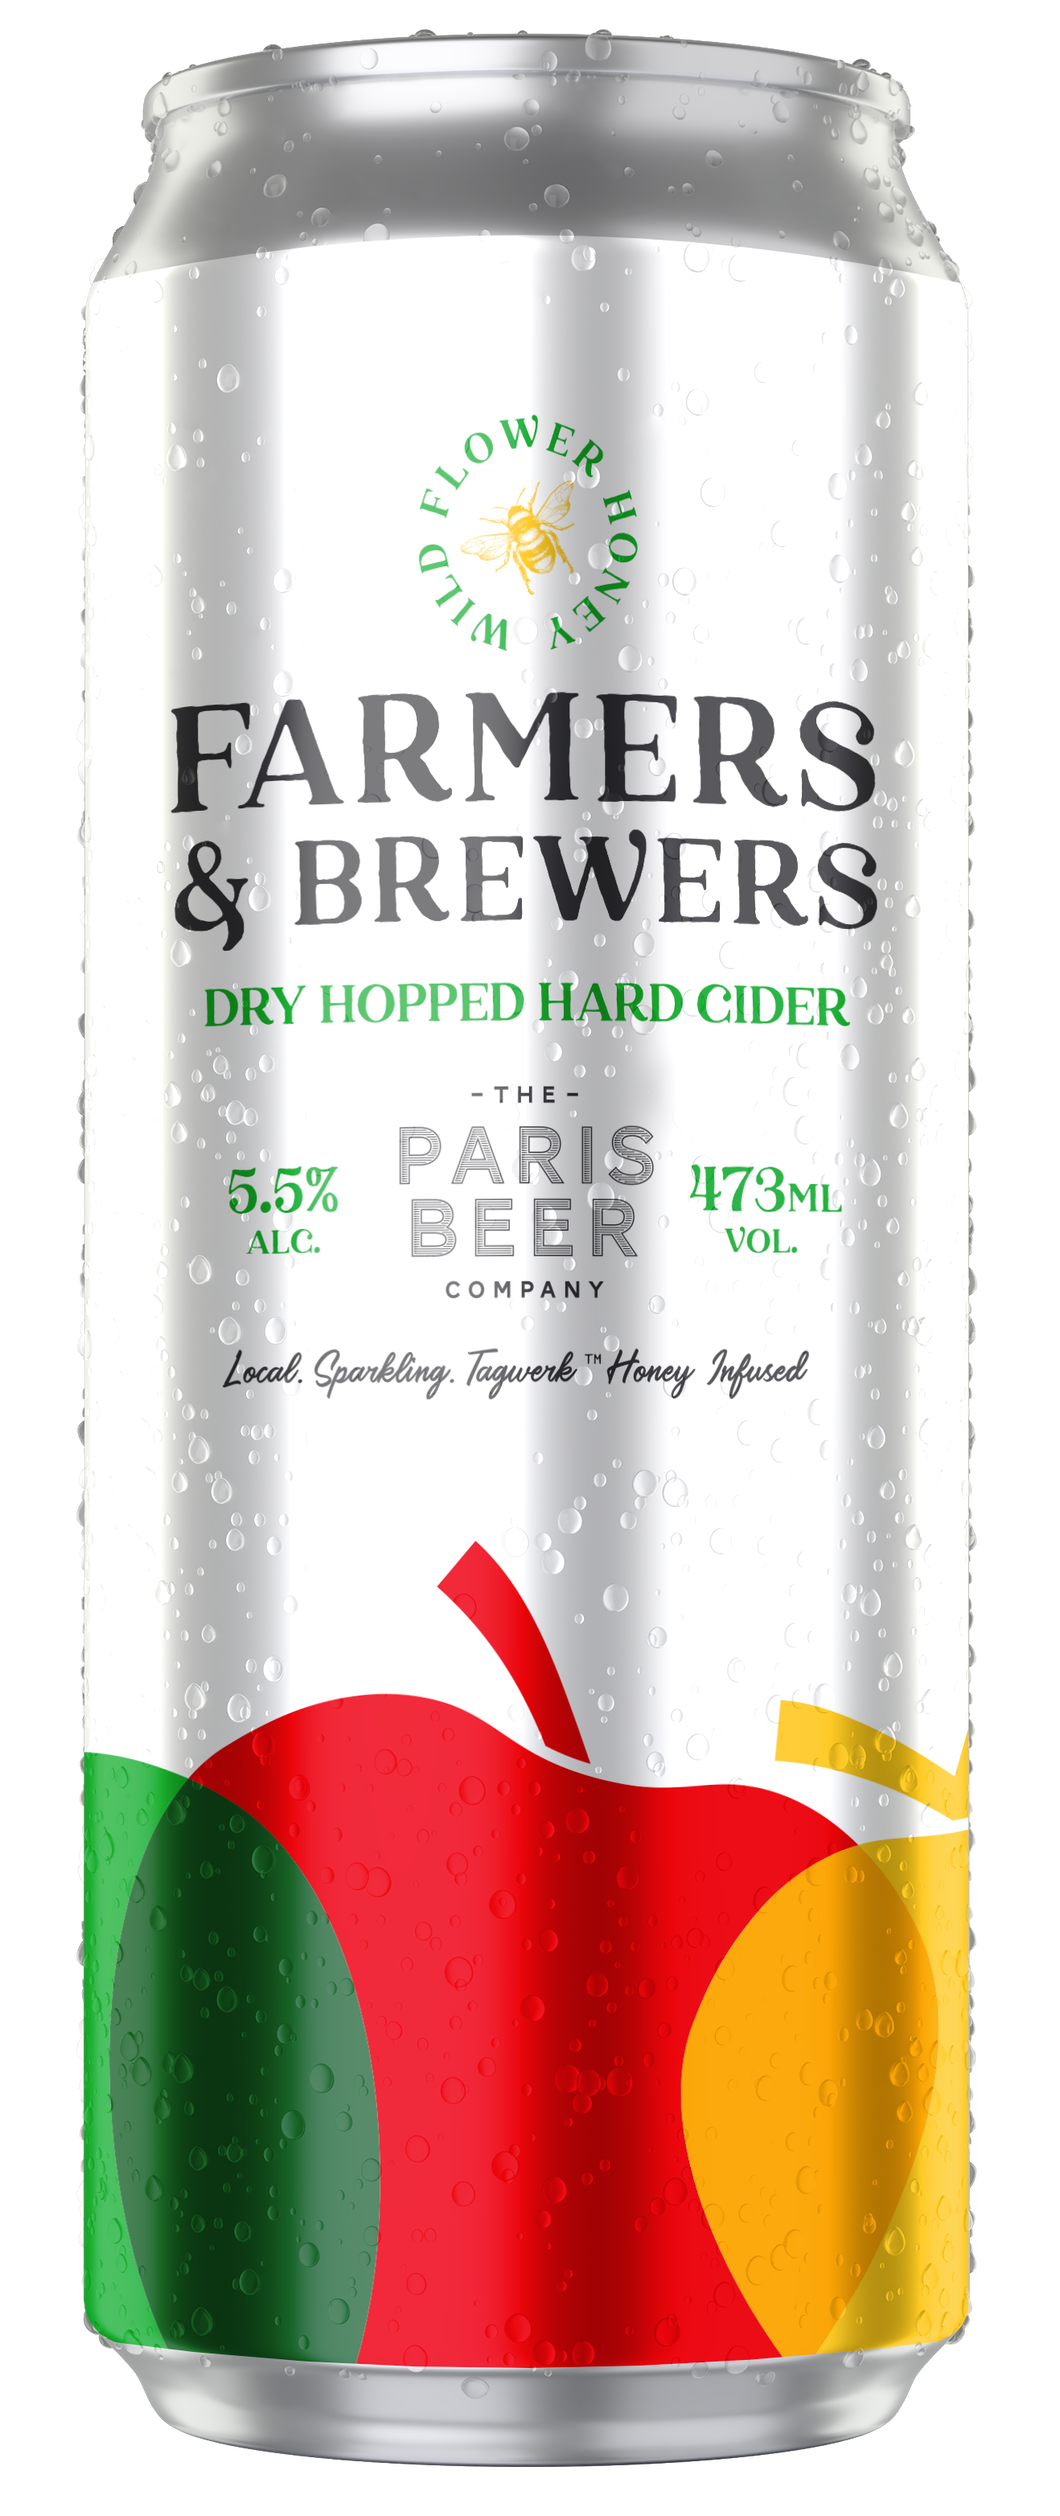 Farmers & Brewers Dry Hopped Hard Cider